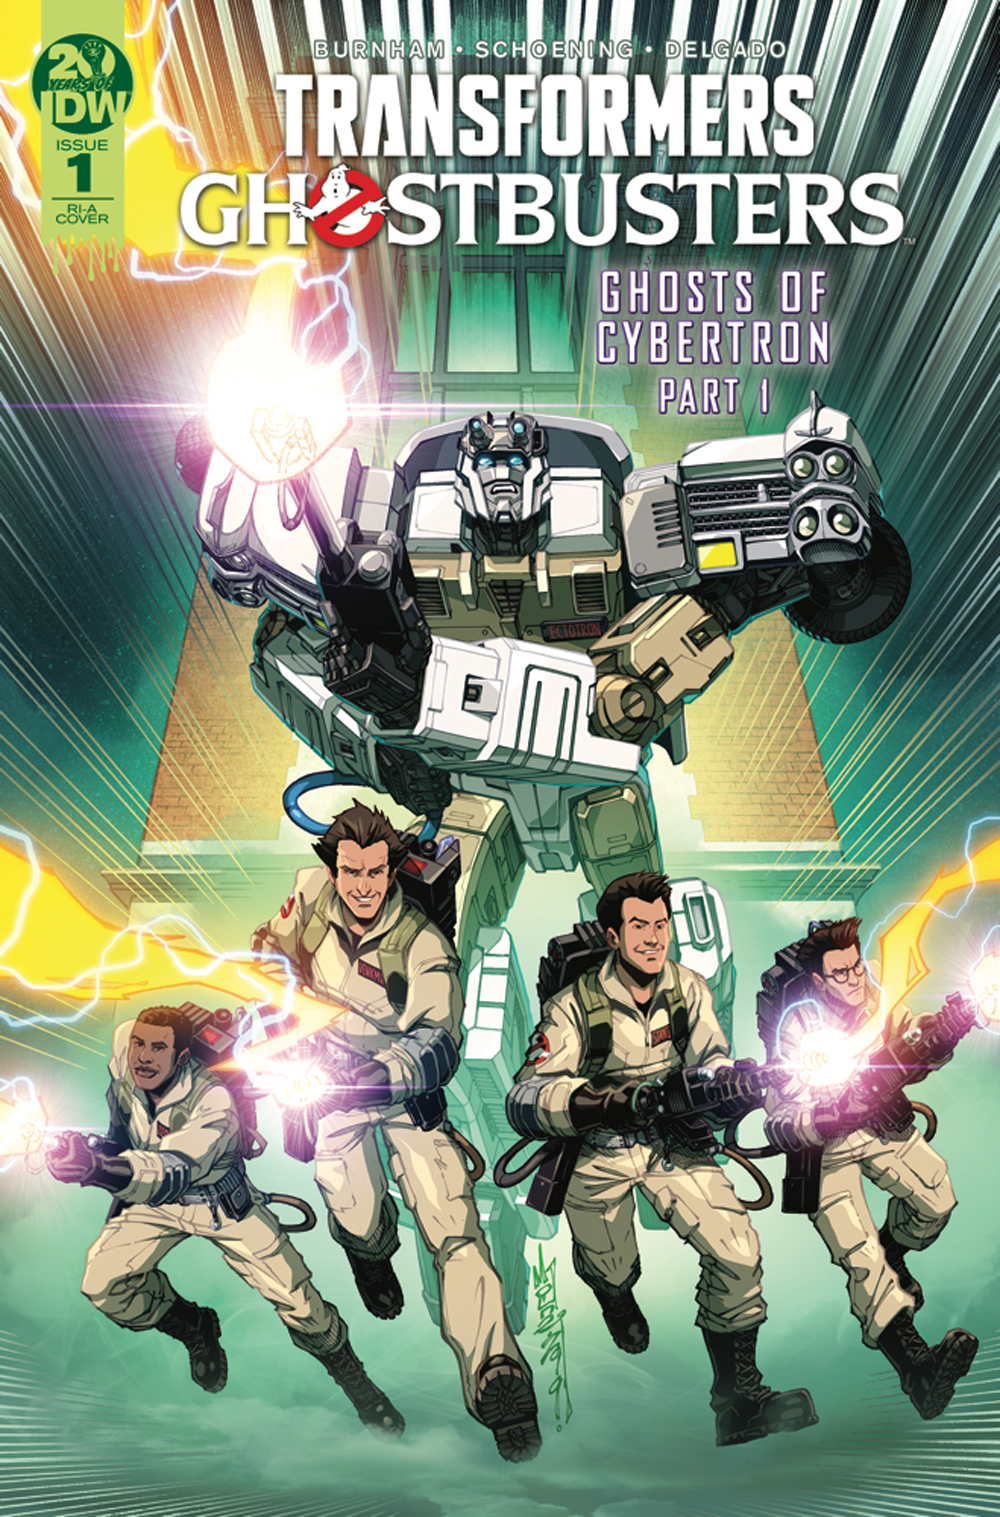 Idw Transformers X Ghostbusters 1 Preview And More Covers